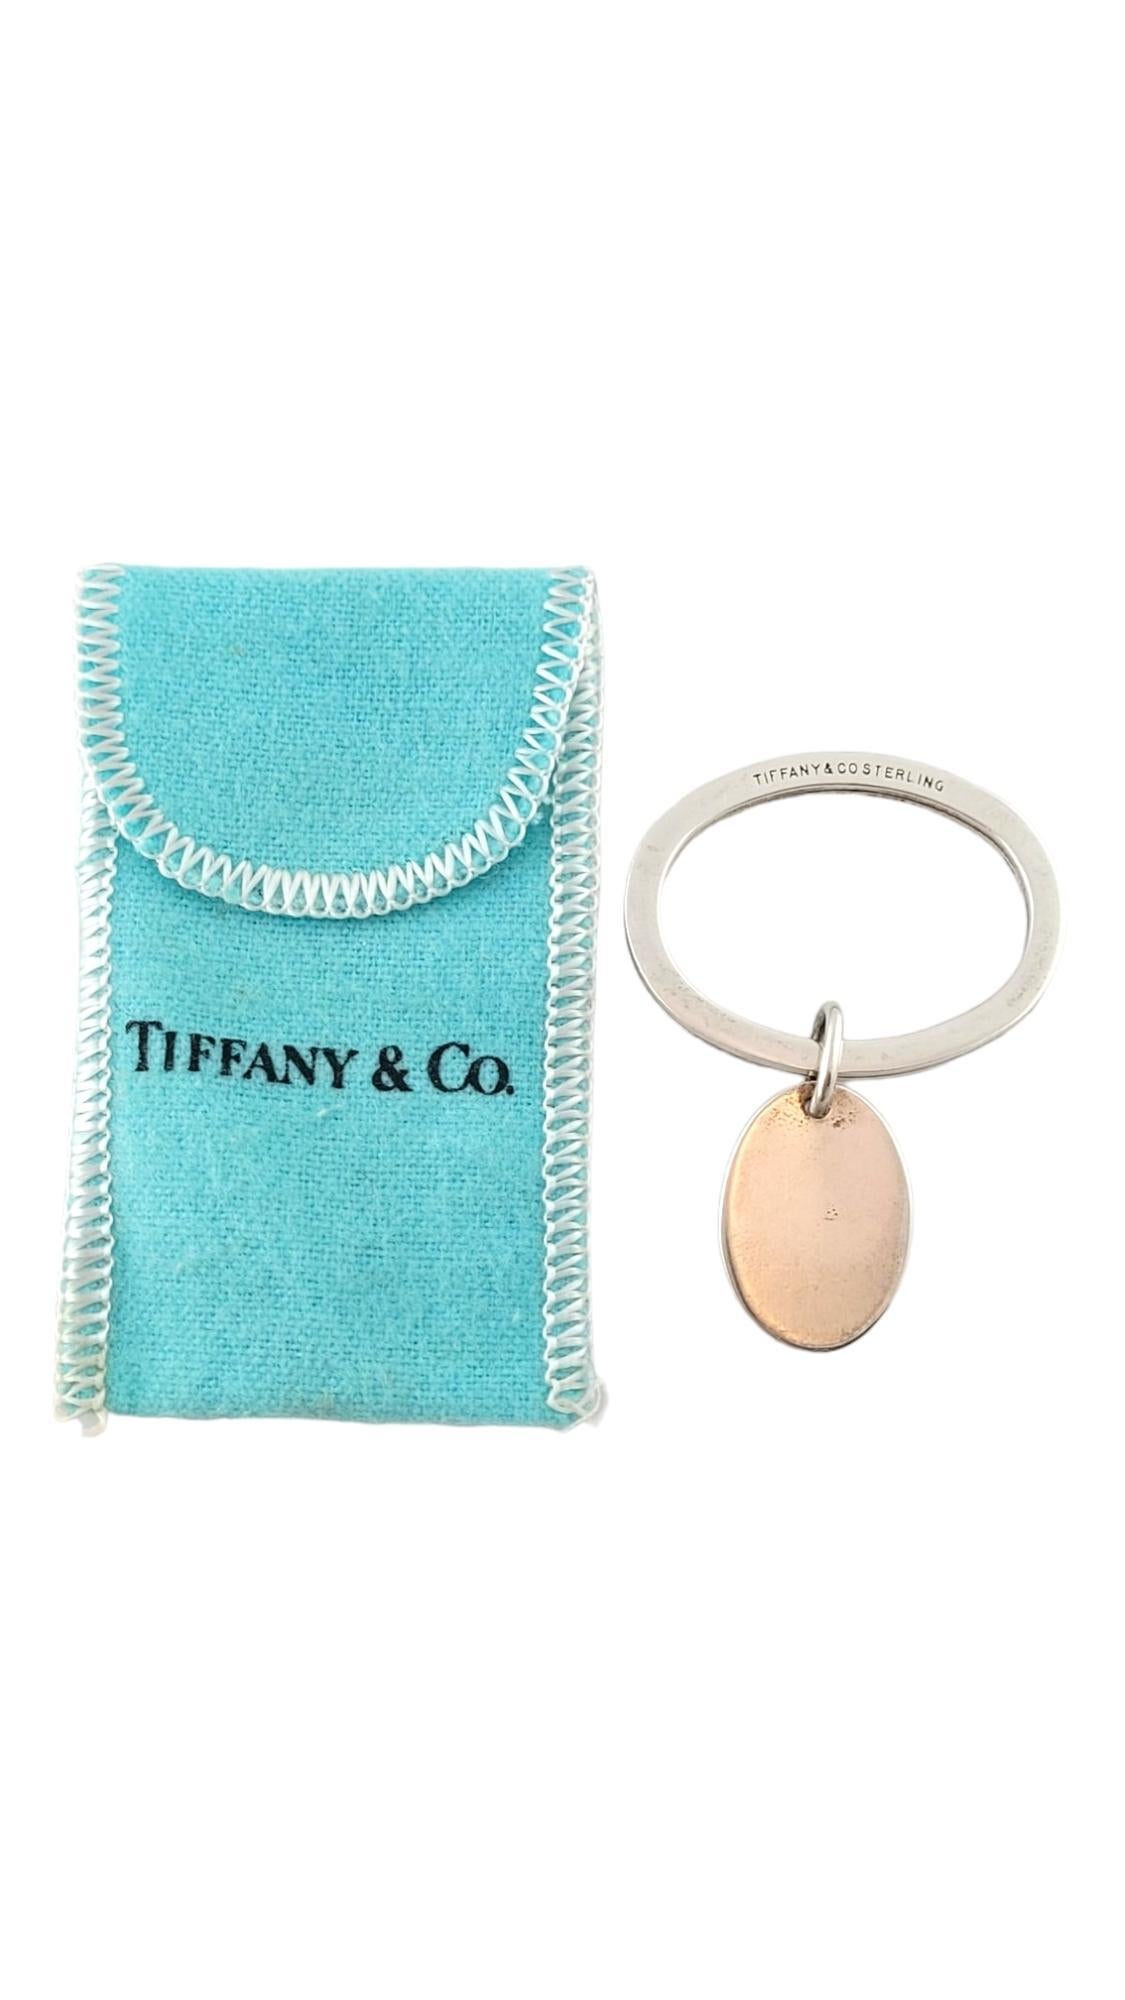 Tiffany & Co. 925 Sterling Silver Oval Key Ring with Tag

This beautiful oval key ring by Tiffany & Co. is crafted from 925 sterling silver with an adorable oval tag charm!

Ring size: 36.45mm X 28.4mm X 2.89mm
Charm size: 22.05mm X 15.57mm X